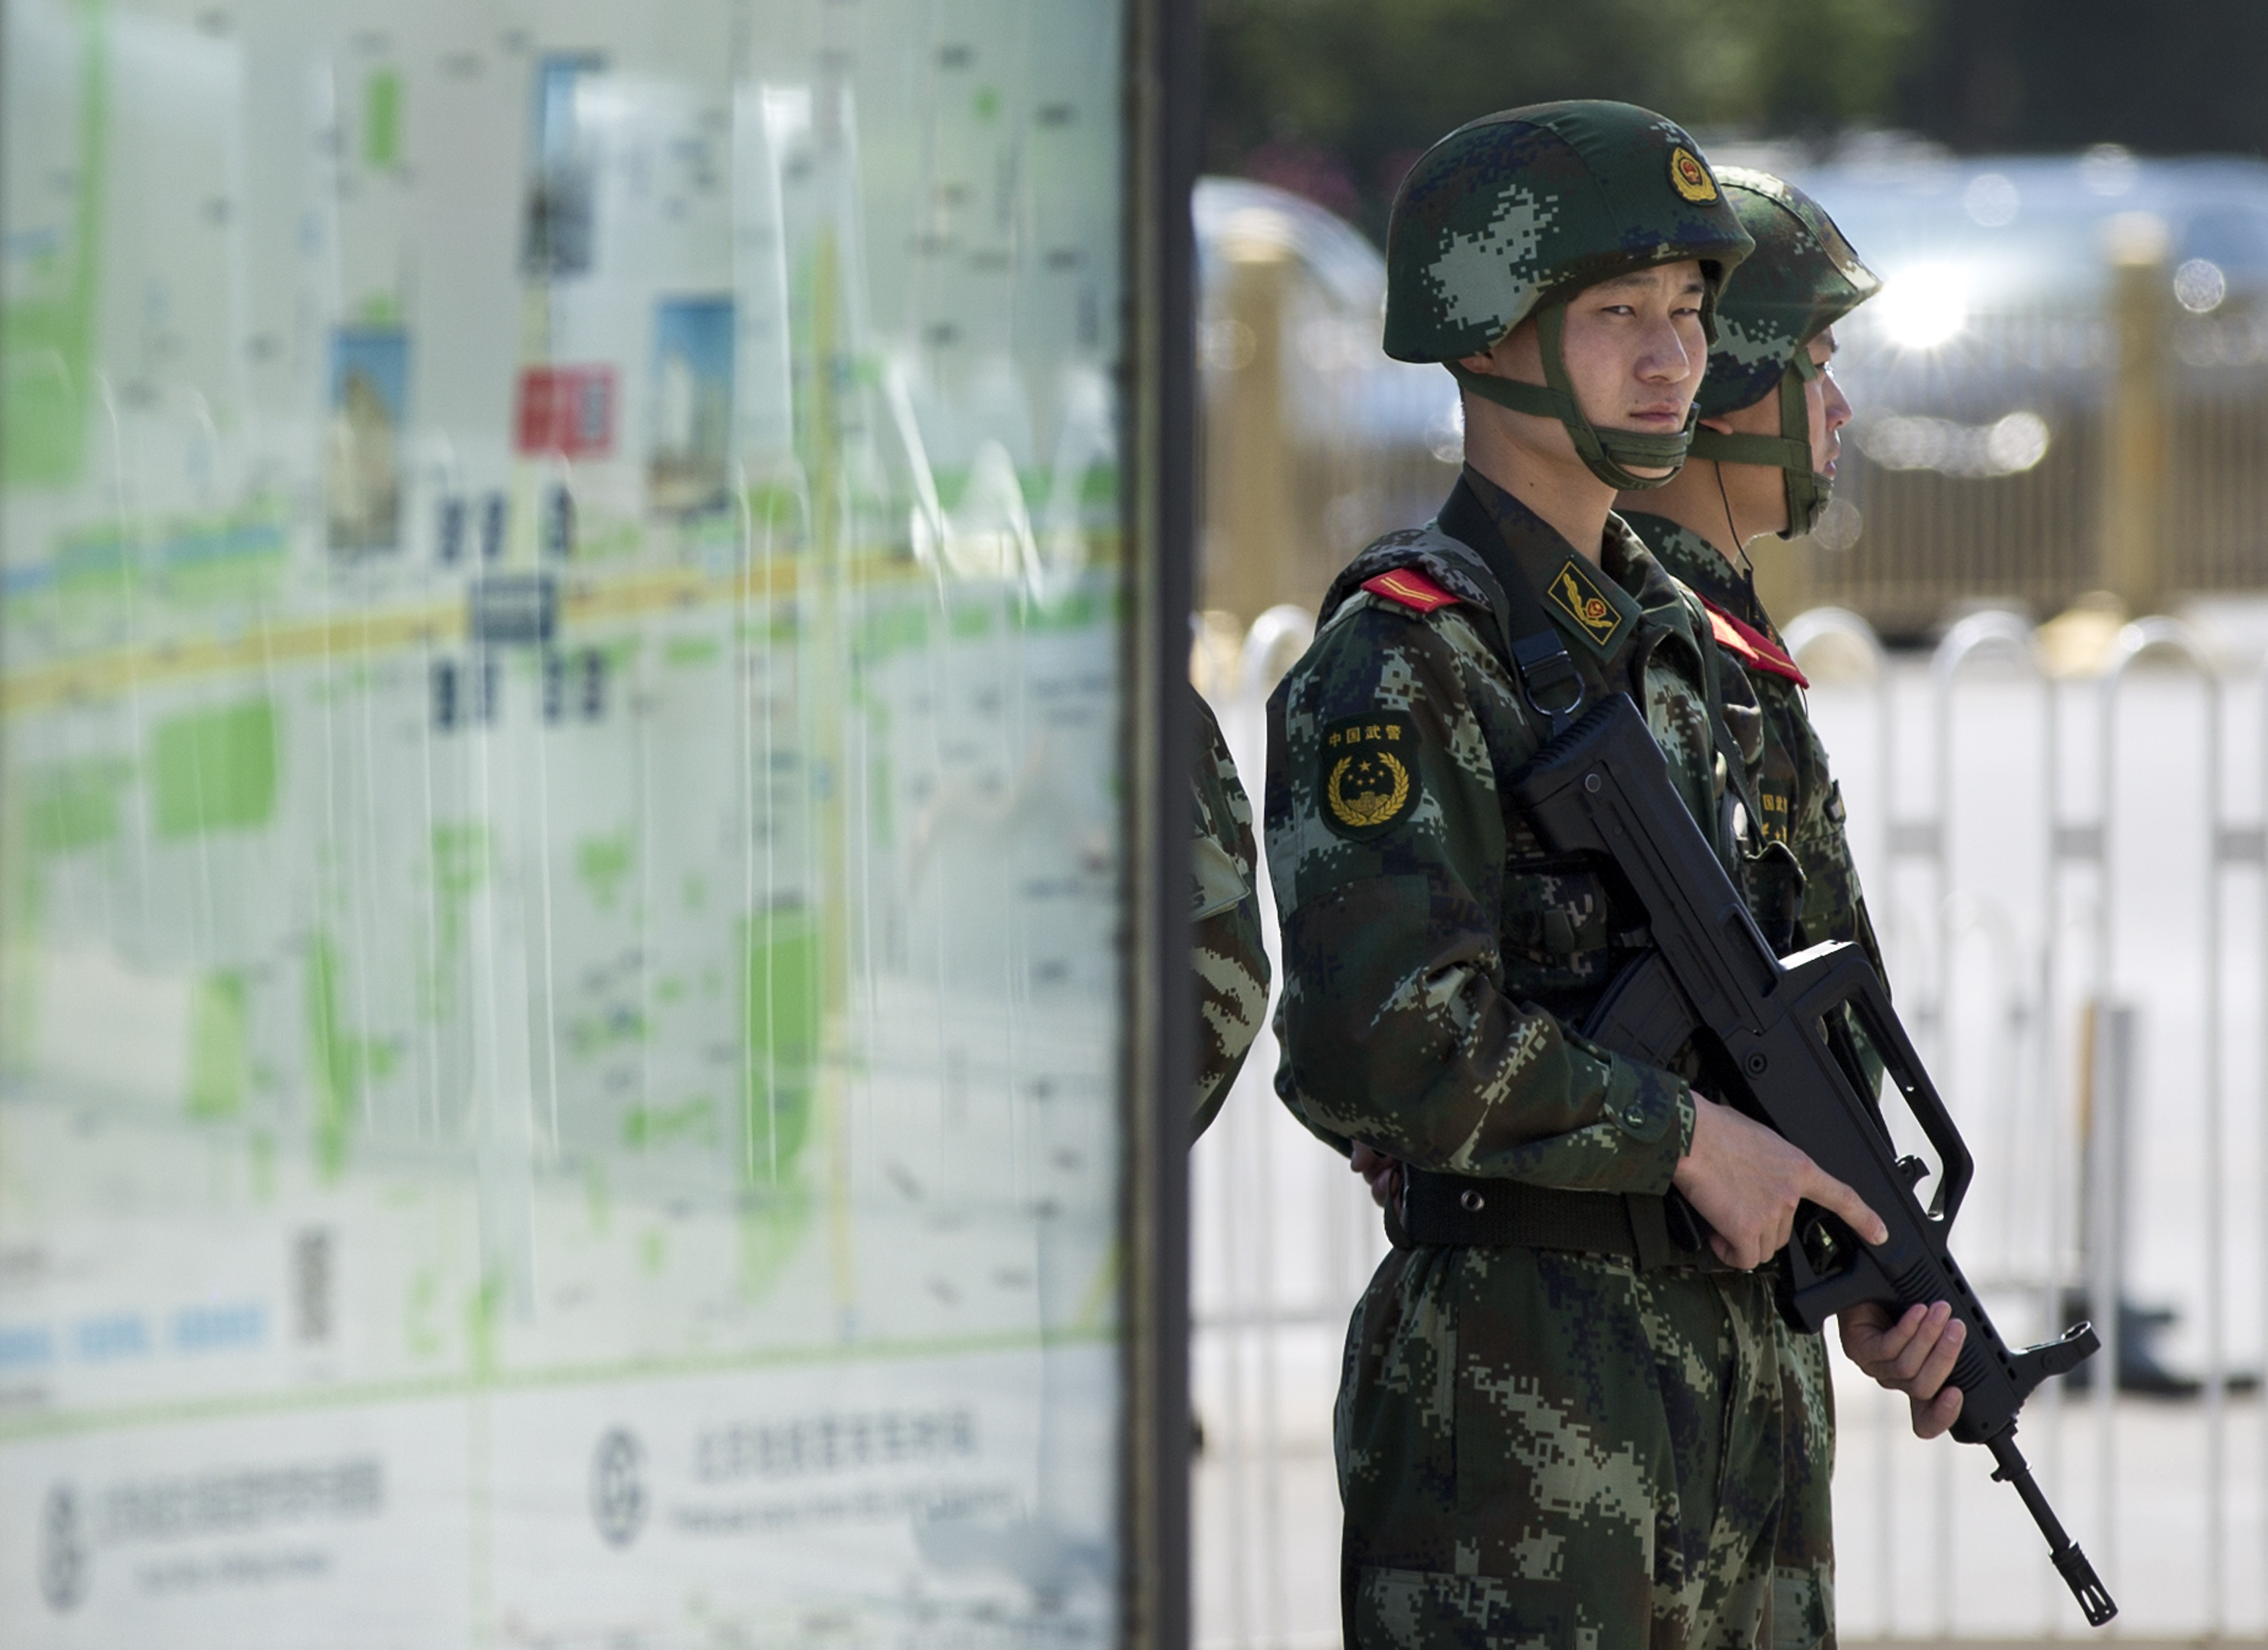 Armed police patrols were boosted in Beijing after a spate of terrorist attacks took place last year. Photo: AP